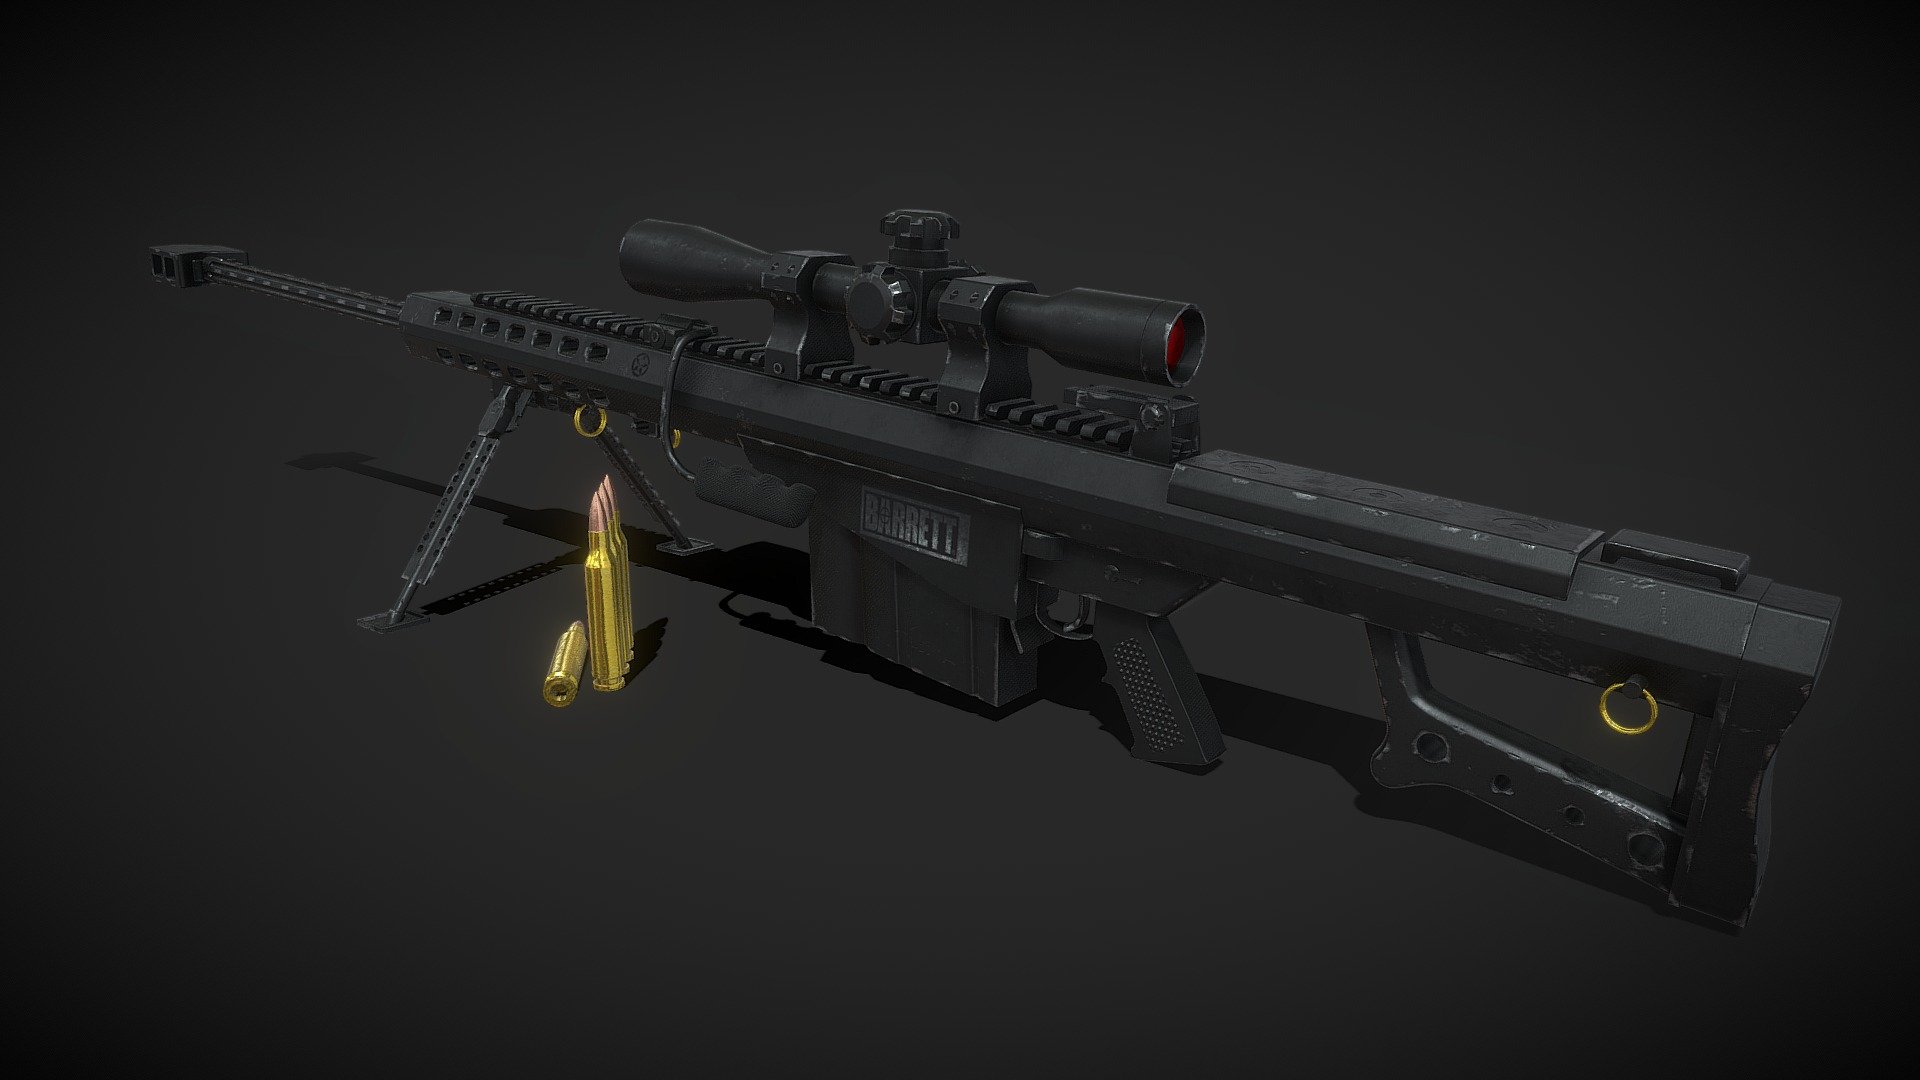 This time I made a Sniper. It's a Barrett M107. I chose this model because I wanted to improve my 3D Modeling skills. 

https://www.artstation.com/artwork/Wmm4NG - Sniper Barrett M-107 - 3D model by Julian Hoogendoorn (@JulianHoogendoorn) 3d model